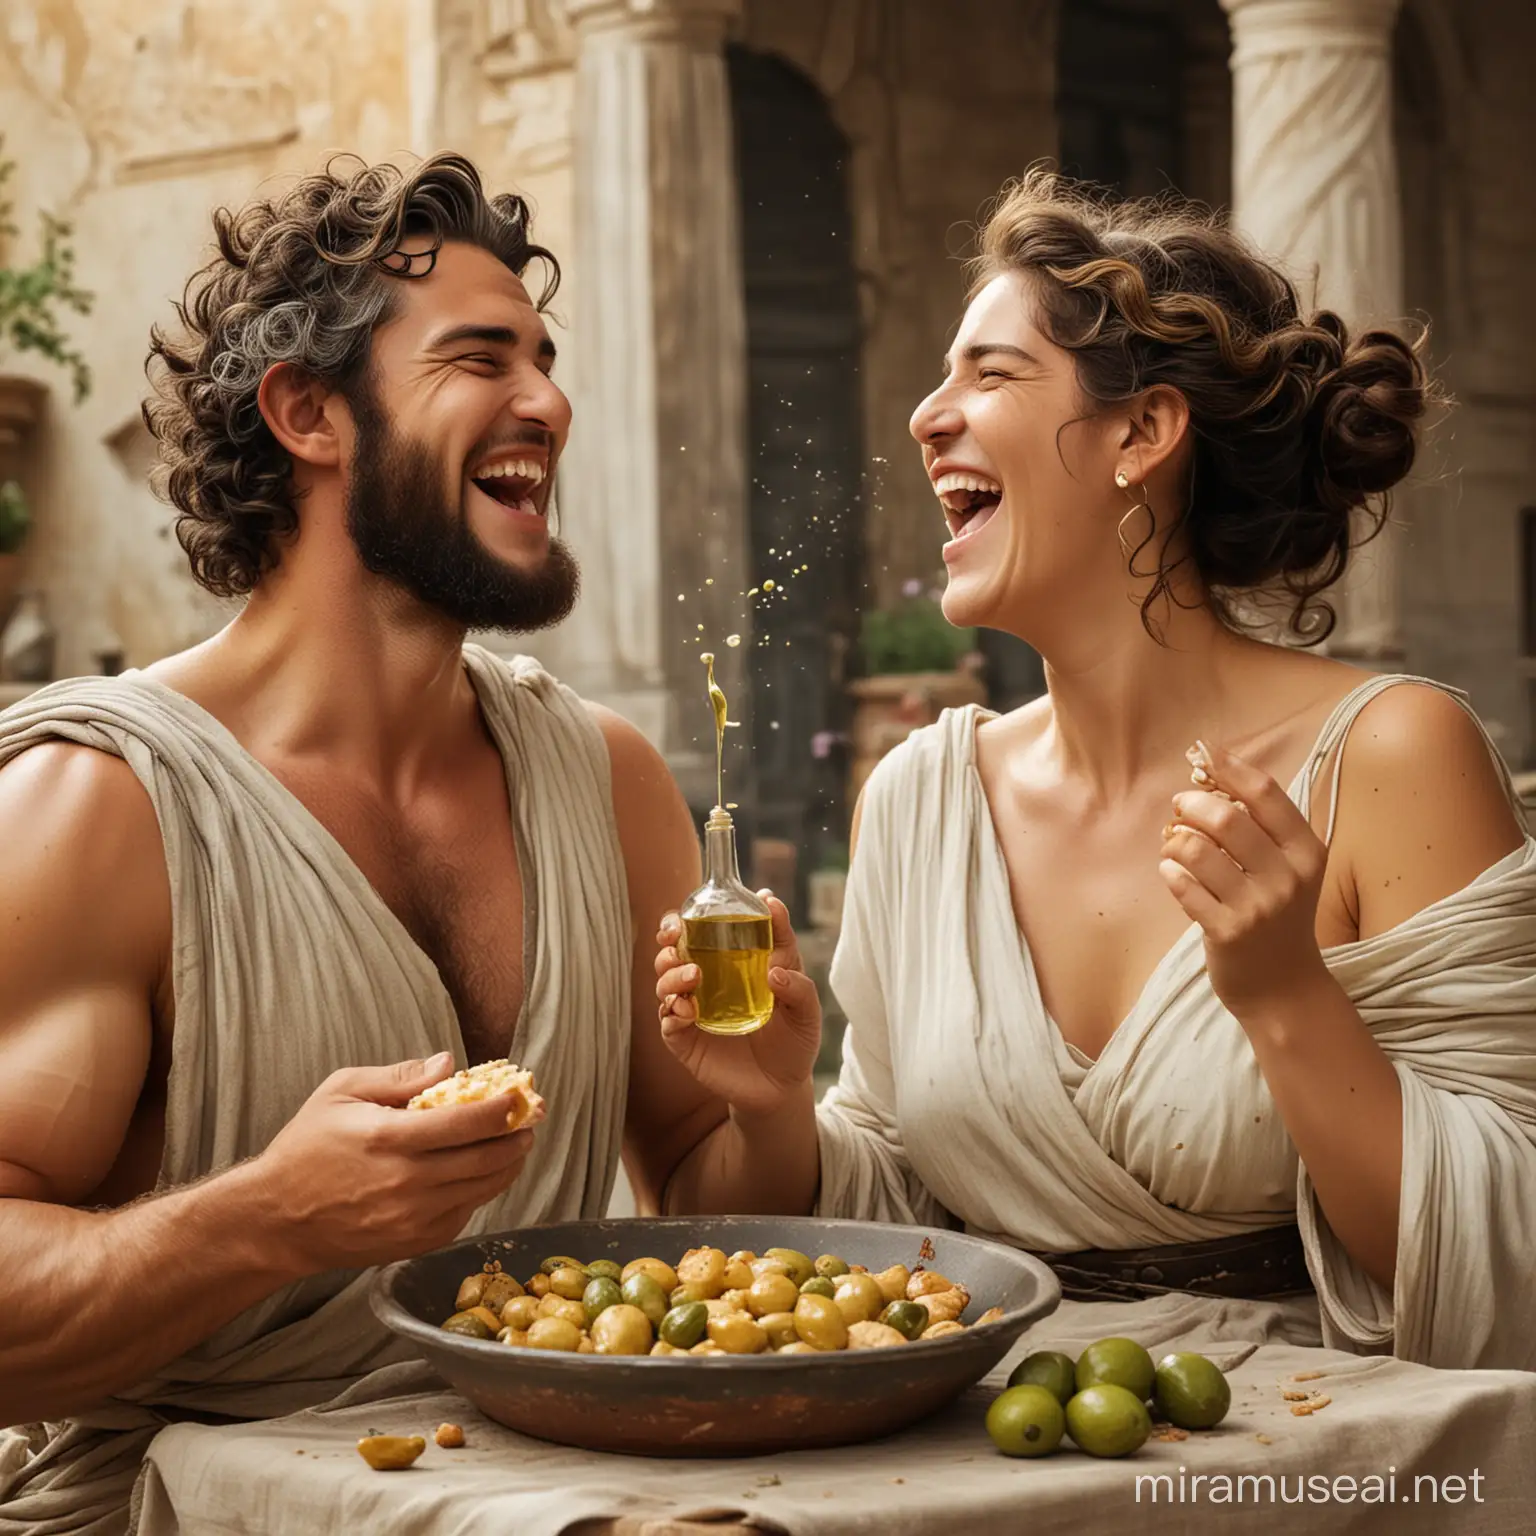 Zeus and Hera Enjoying a Feast with Olive Oil and Laughter